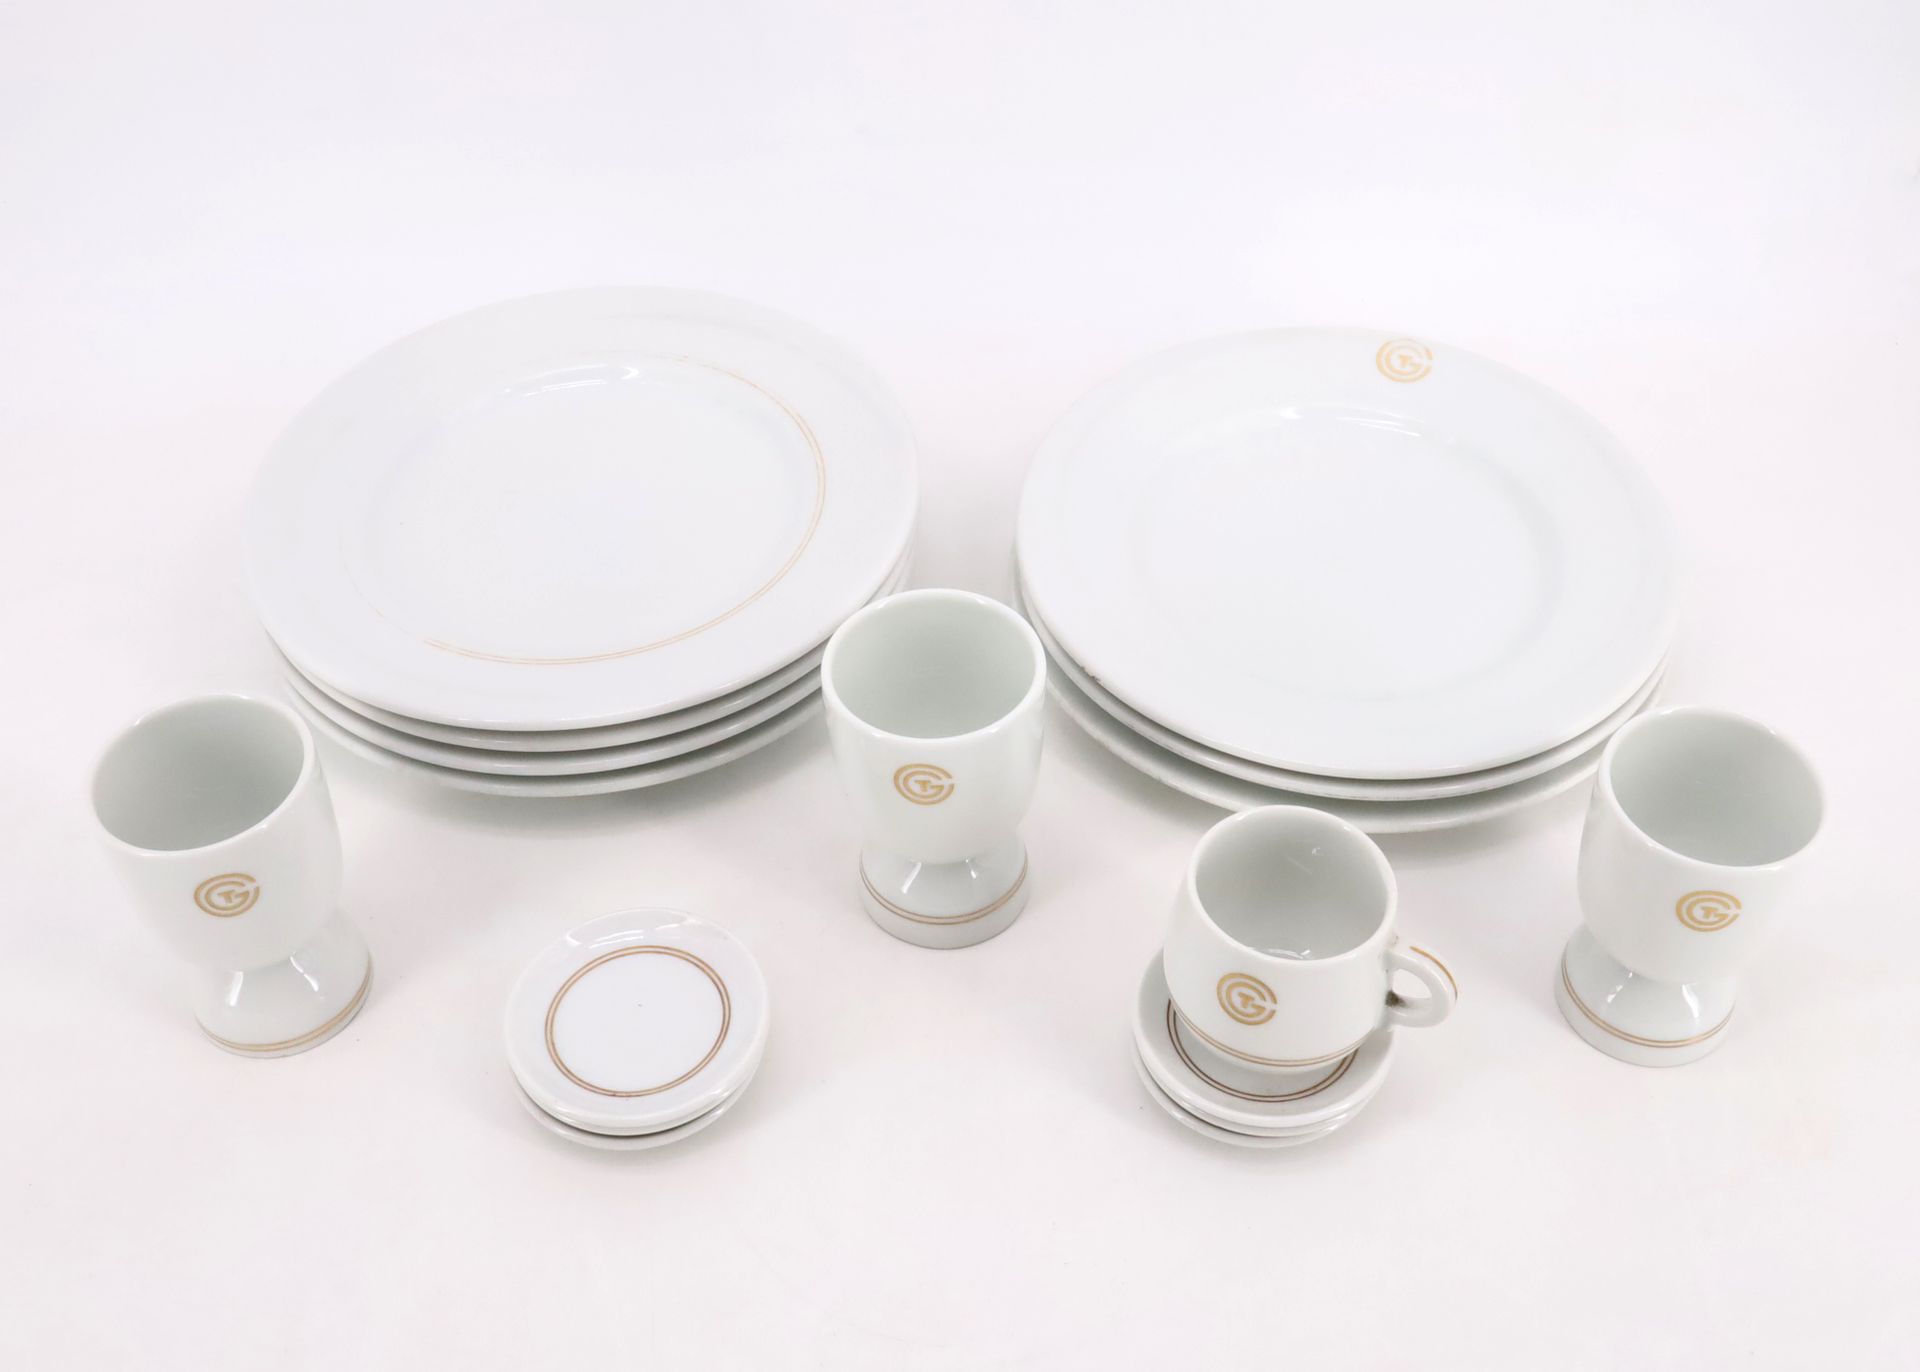 Null CGT France 1962 - Porcelain service set including seven plates, one cup wit&hellip;